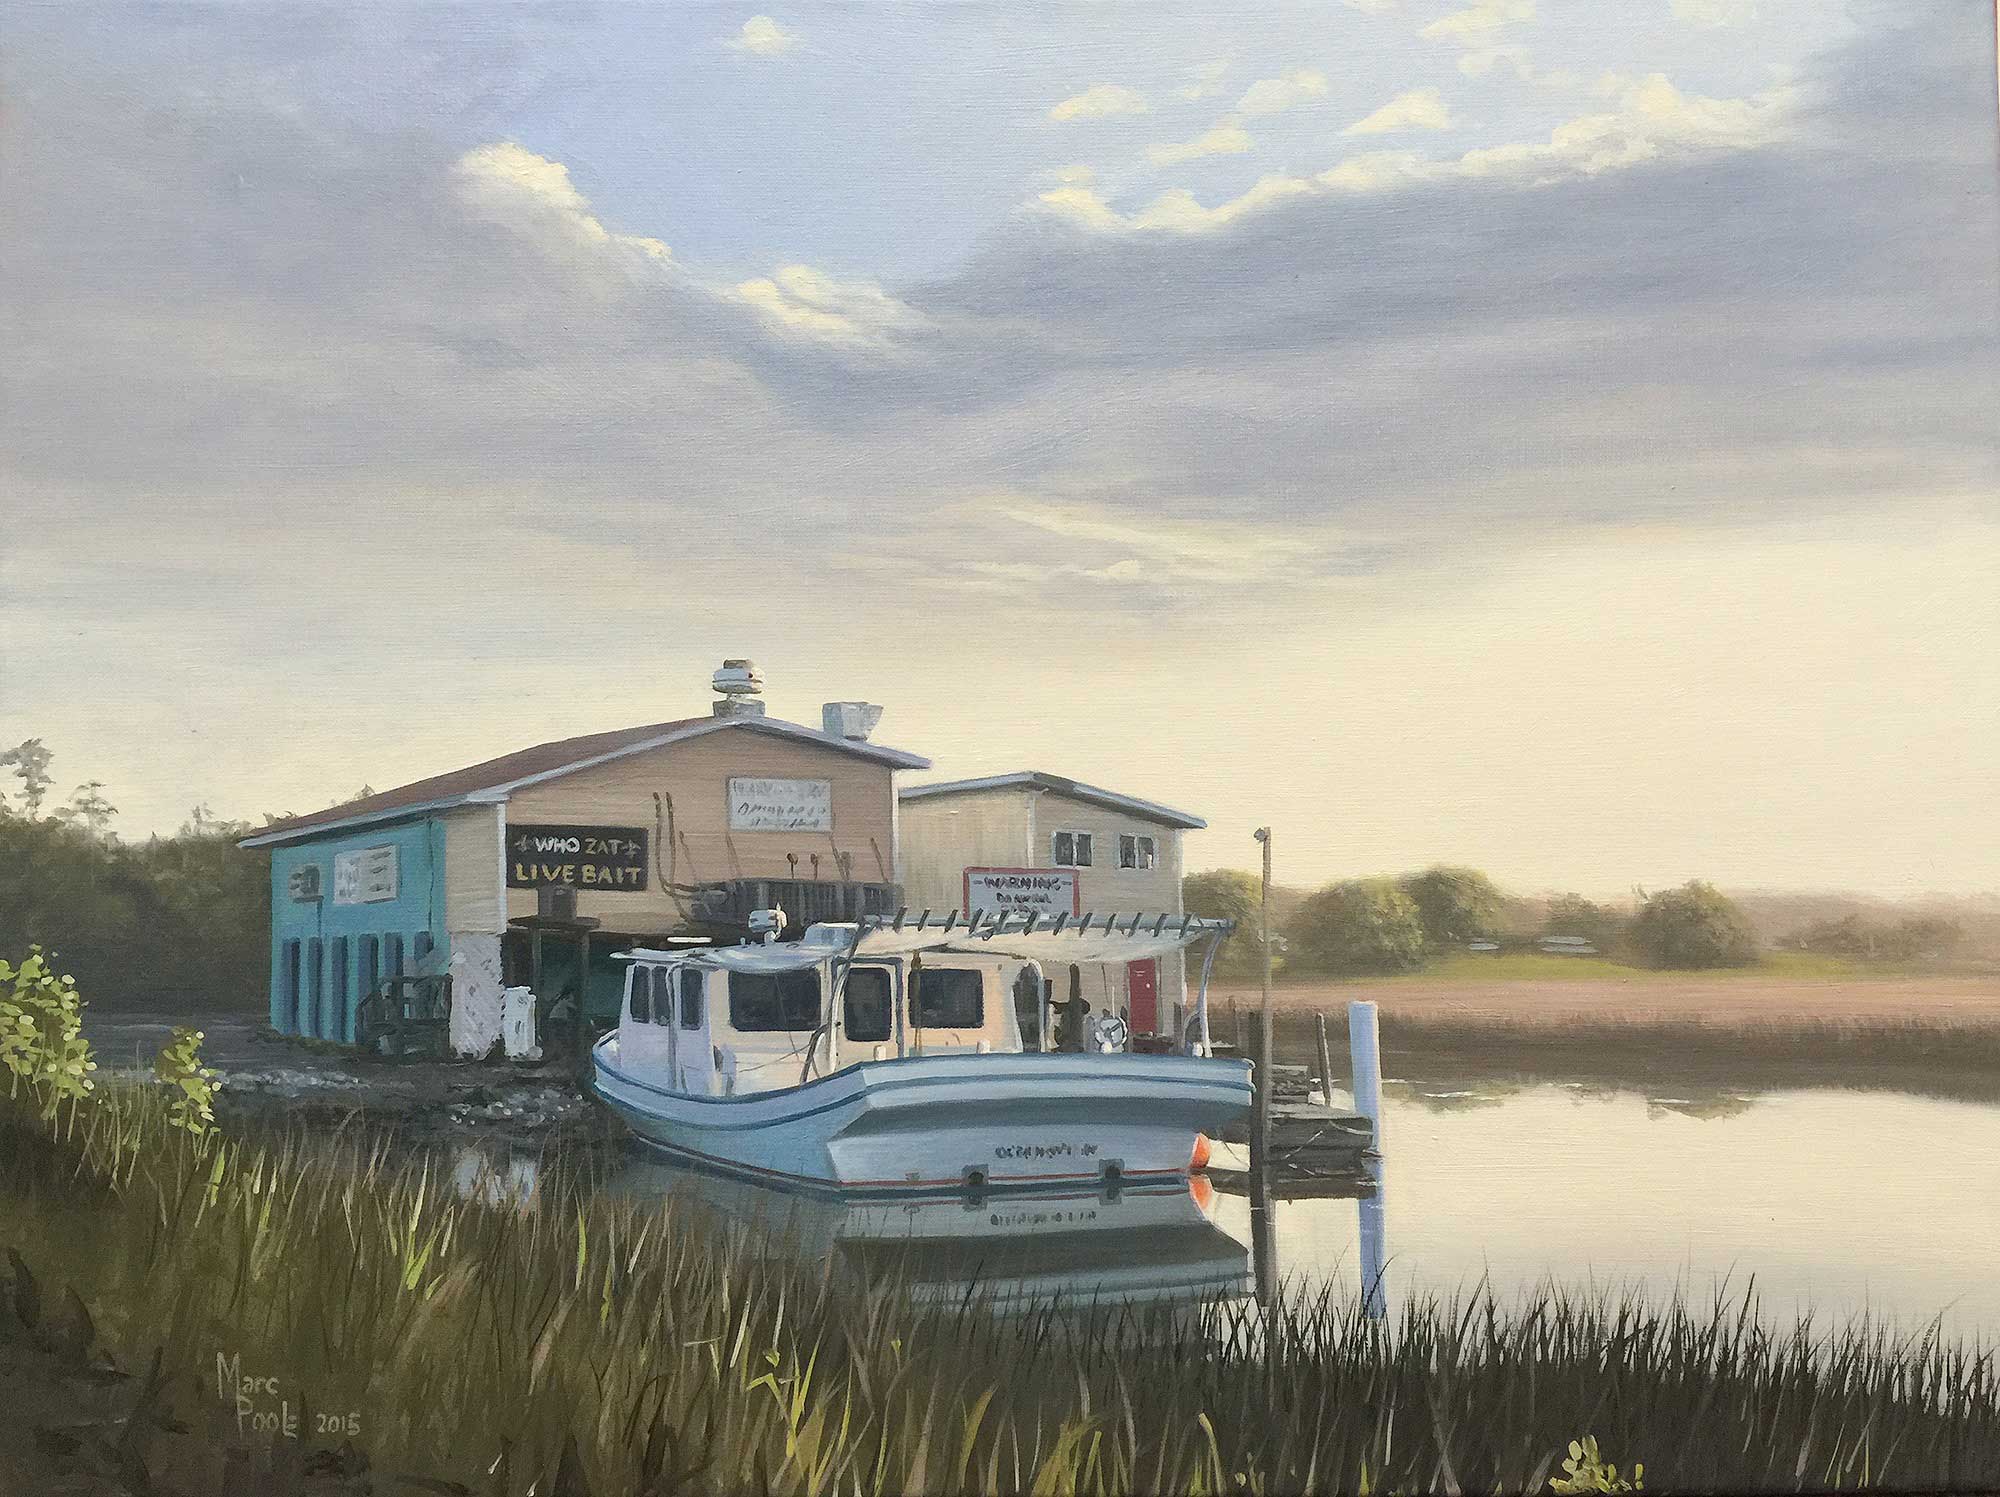 Marc Poole, Mikey’s on the Bayou